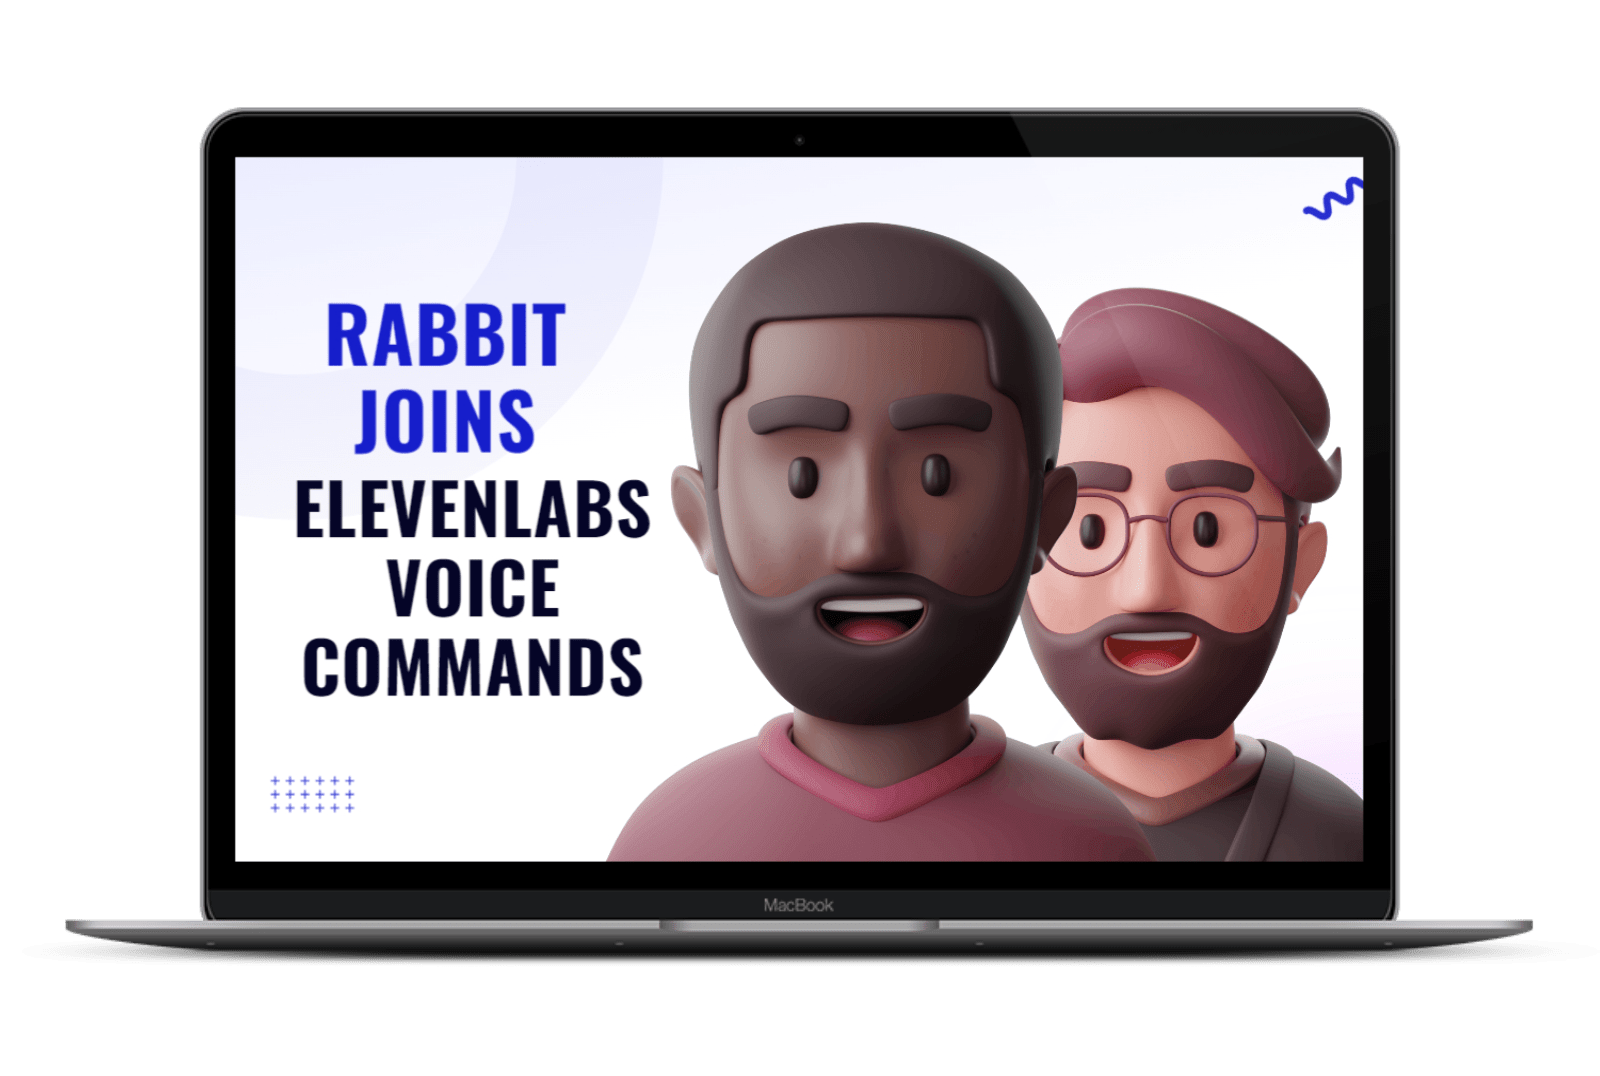 Rabbit joins forces with Eleven Labs to enhance voice command features on its device